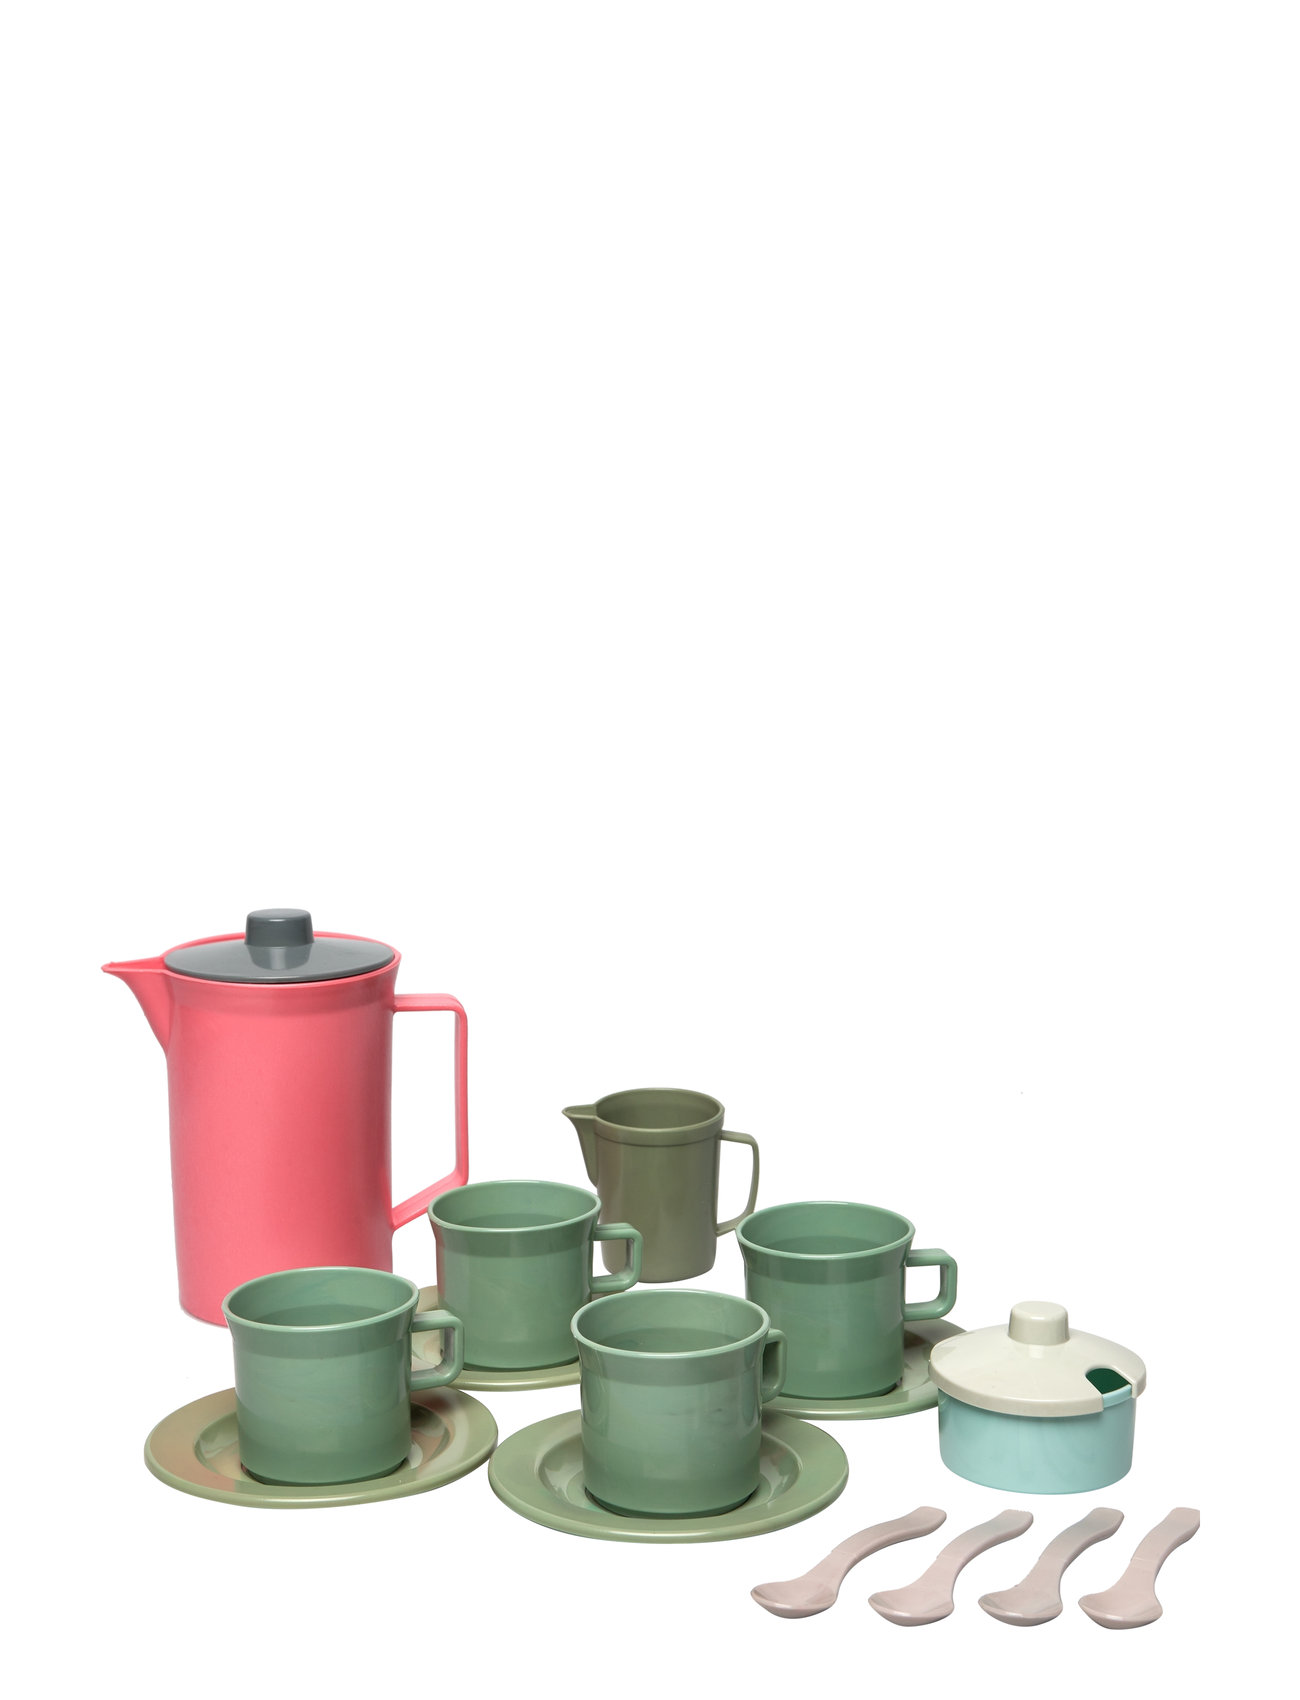 Green Bean Coffee Set In Net 17 Pcs Toys Toy Kitchen & Accessories Coffee & Tea Sets Multi/patterned Dantoy